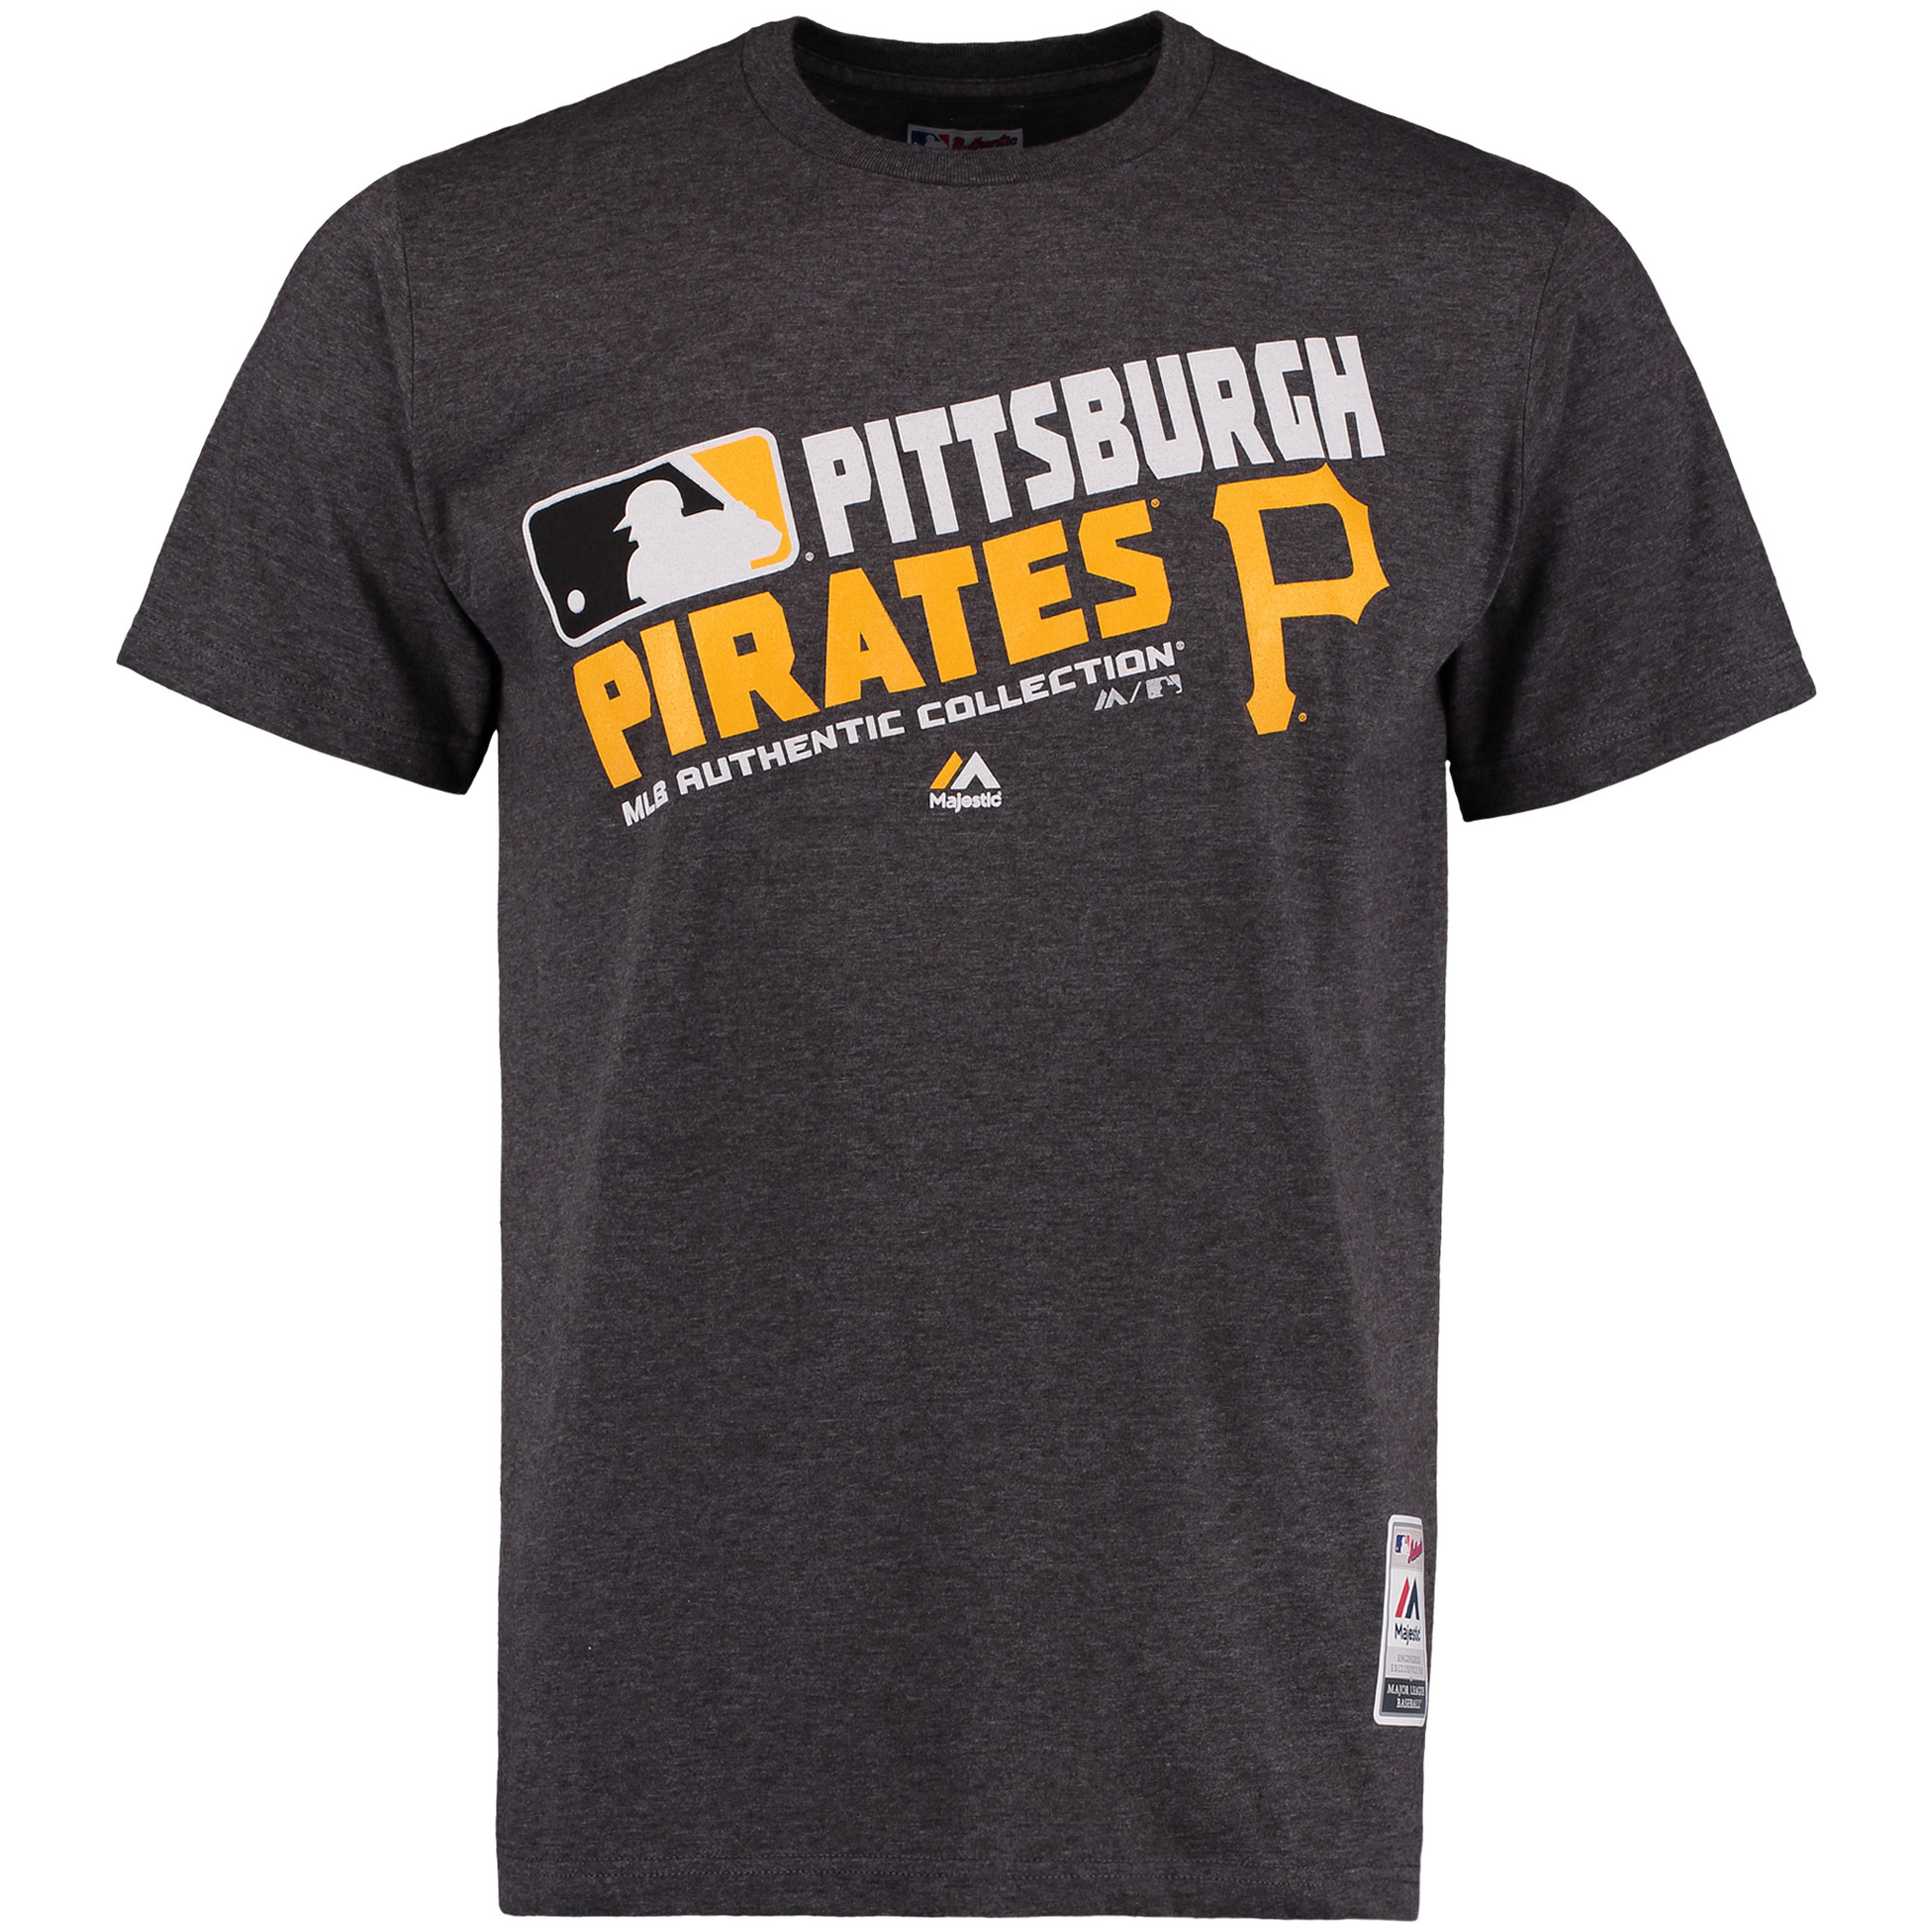 pittsburgh pirates father's day jersey